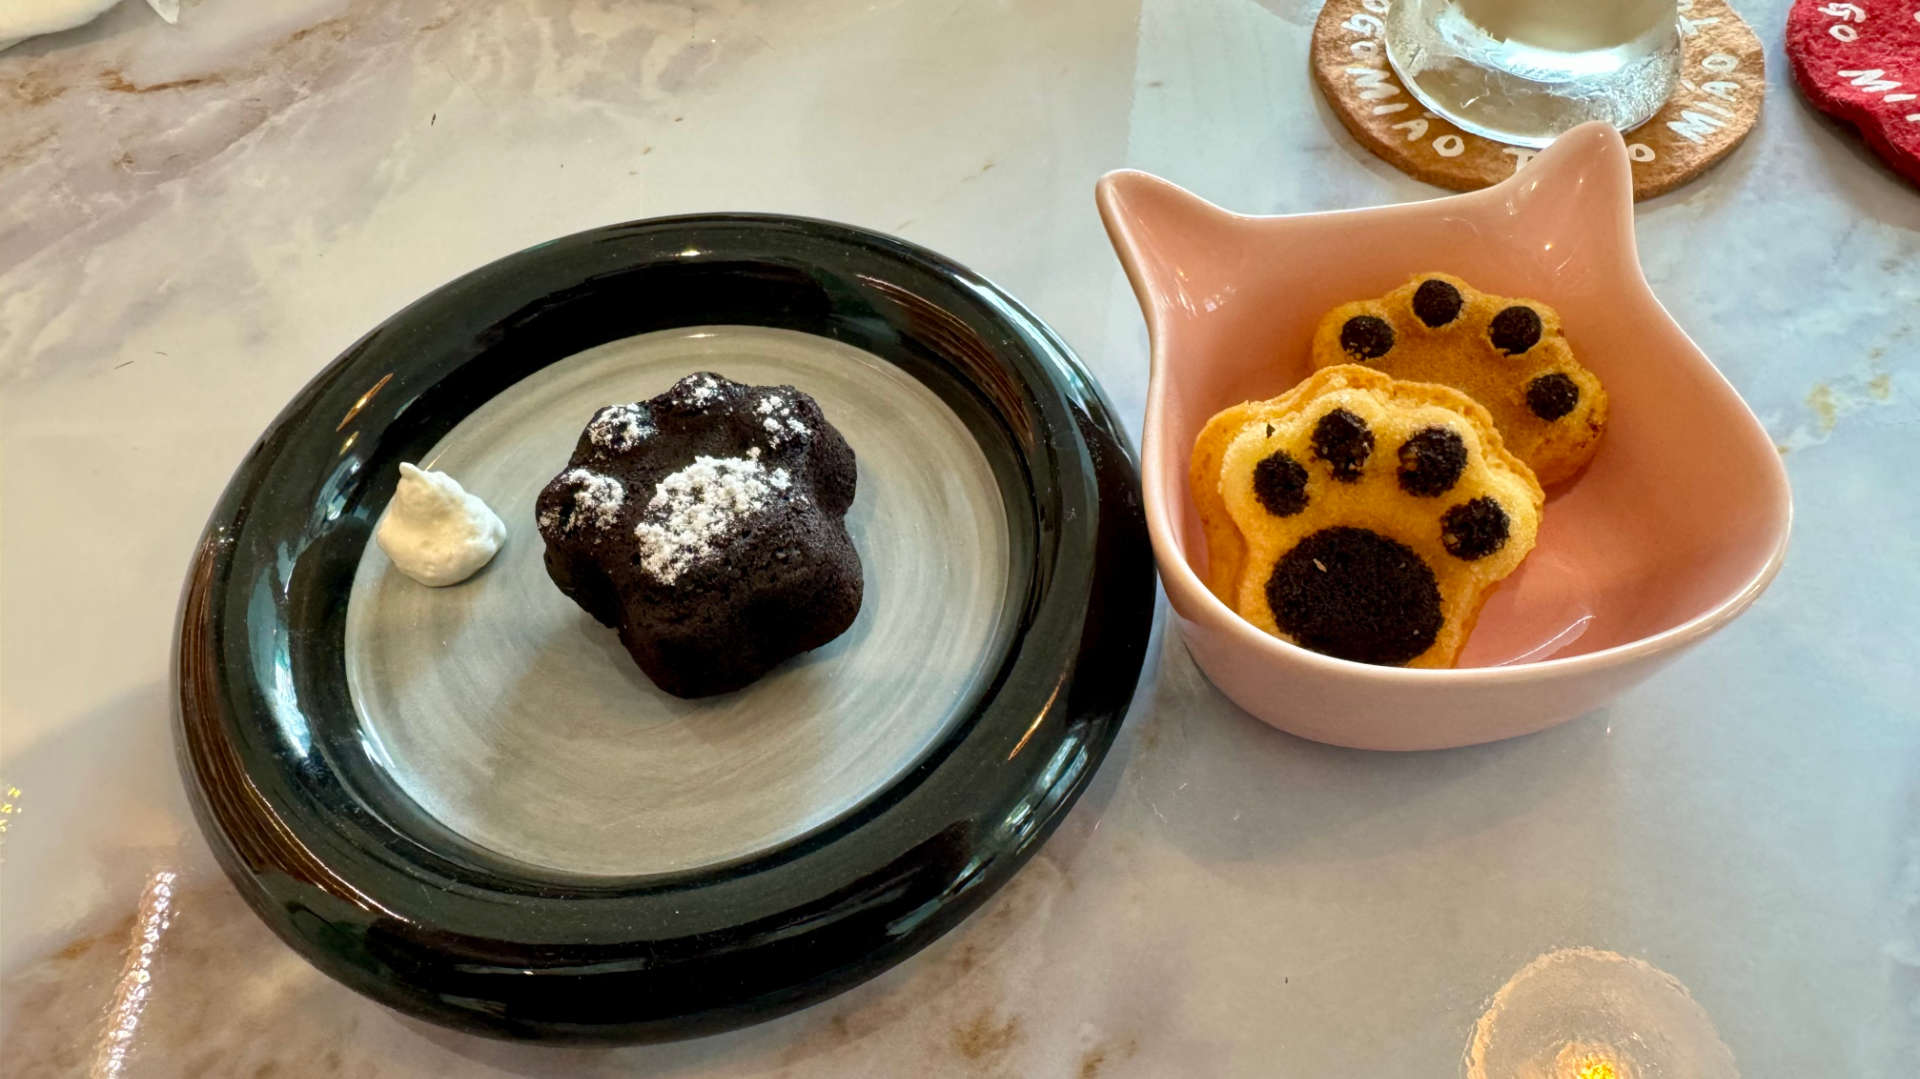 A plate plate with a cat-paw-shaped brownie, and a cat-shaped bowl containing two cat-paw-shaped cookies.